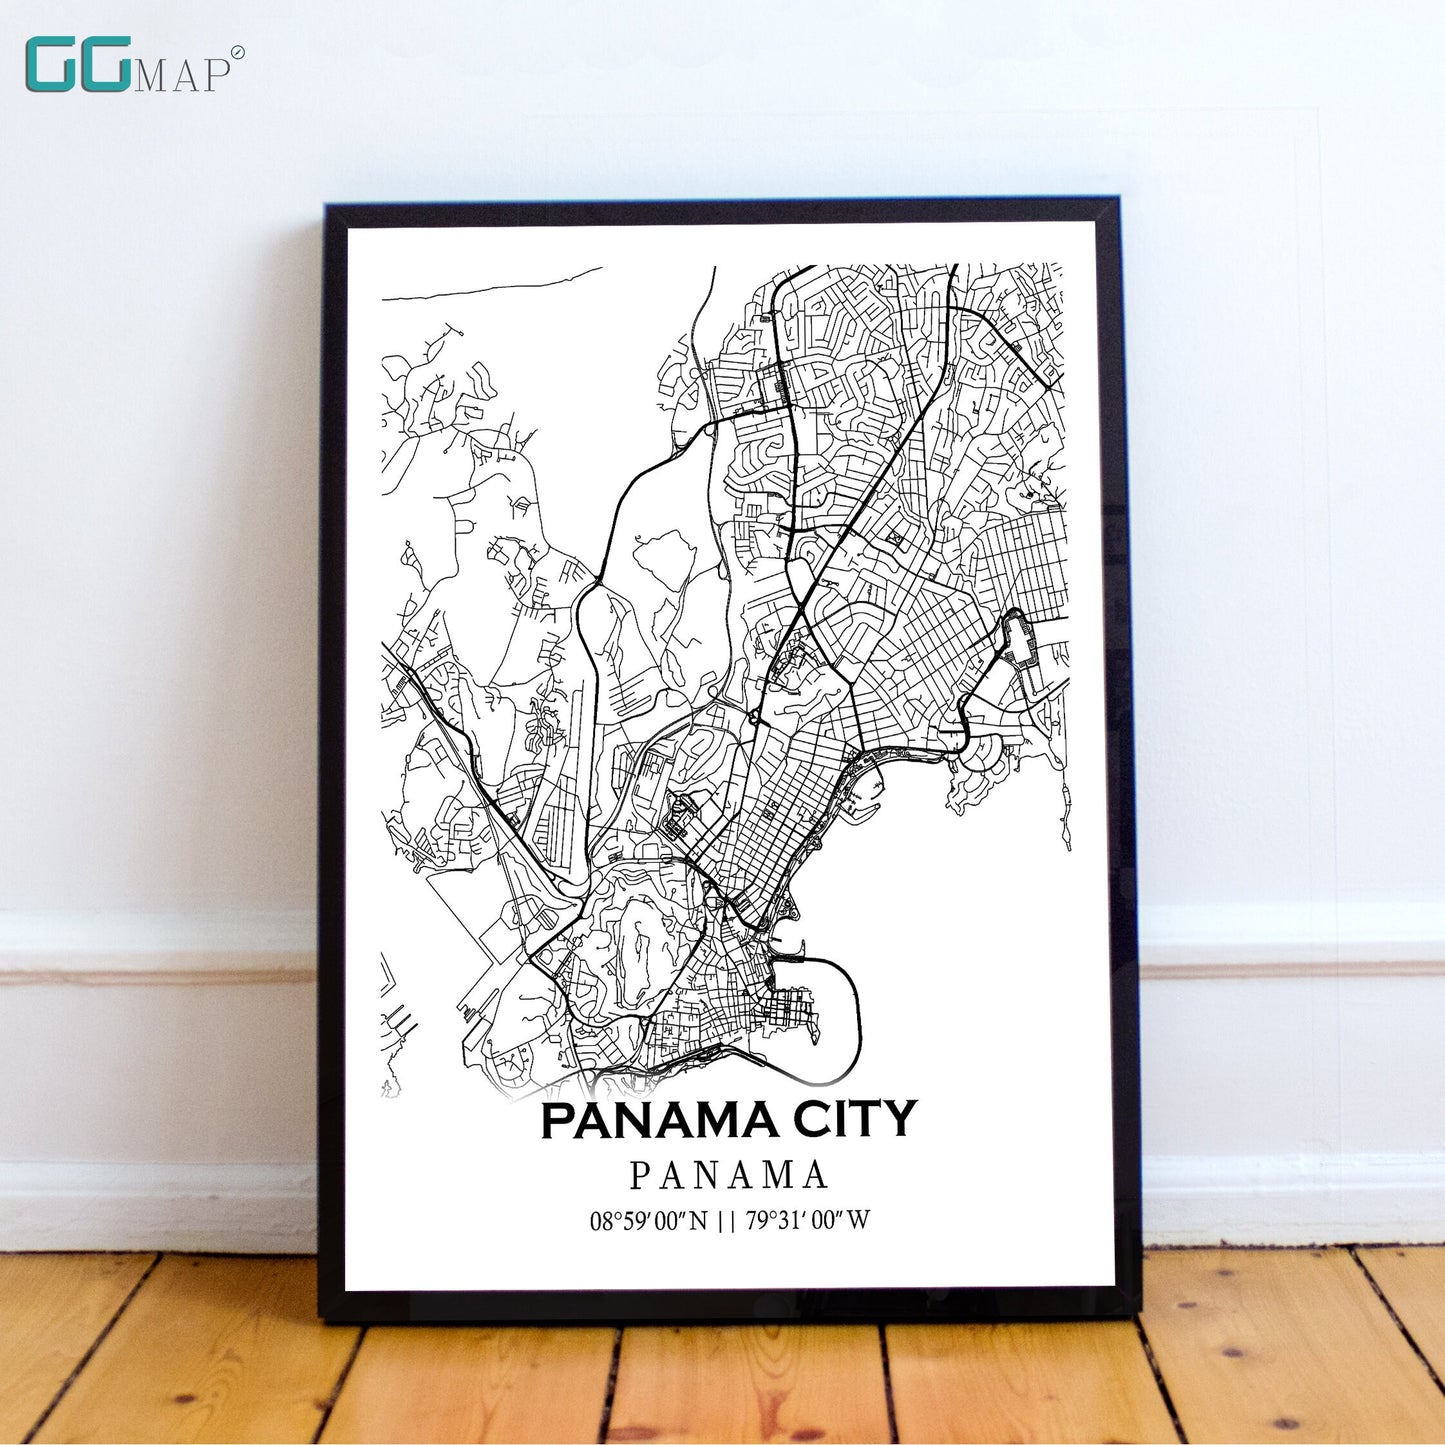 City map of PANAMA CITY - Home Decor - Wall decor - Office map - Travel map - Print map - Poster city map - Panama City map -Map art -Panama